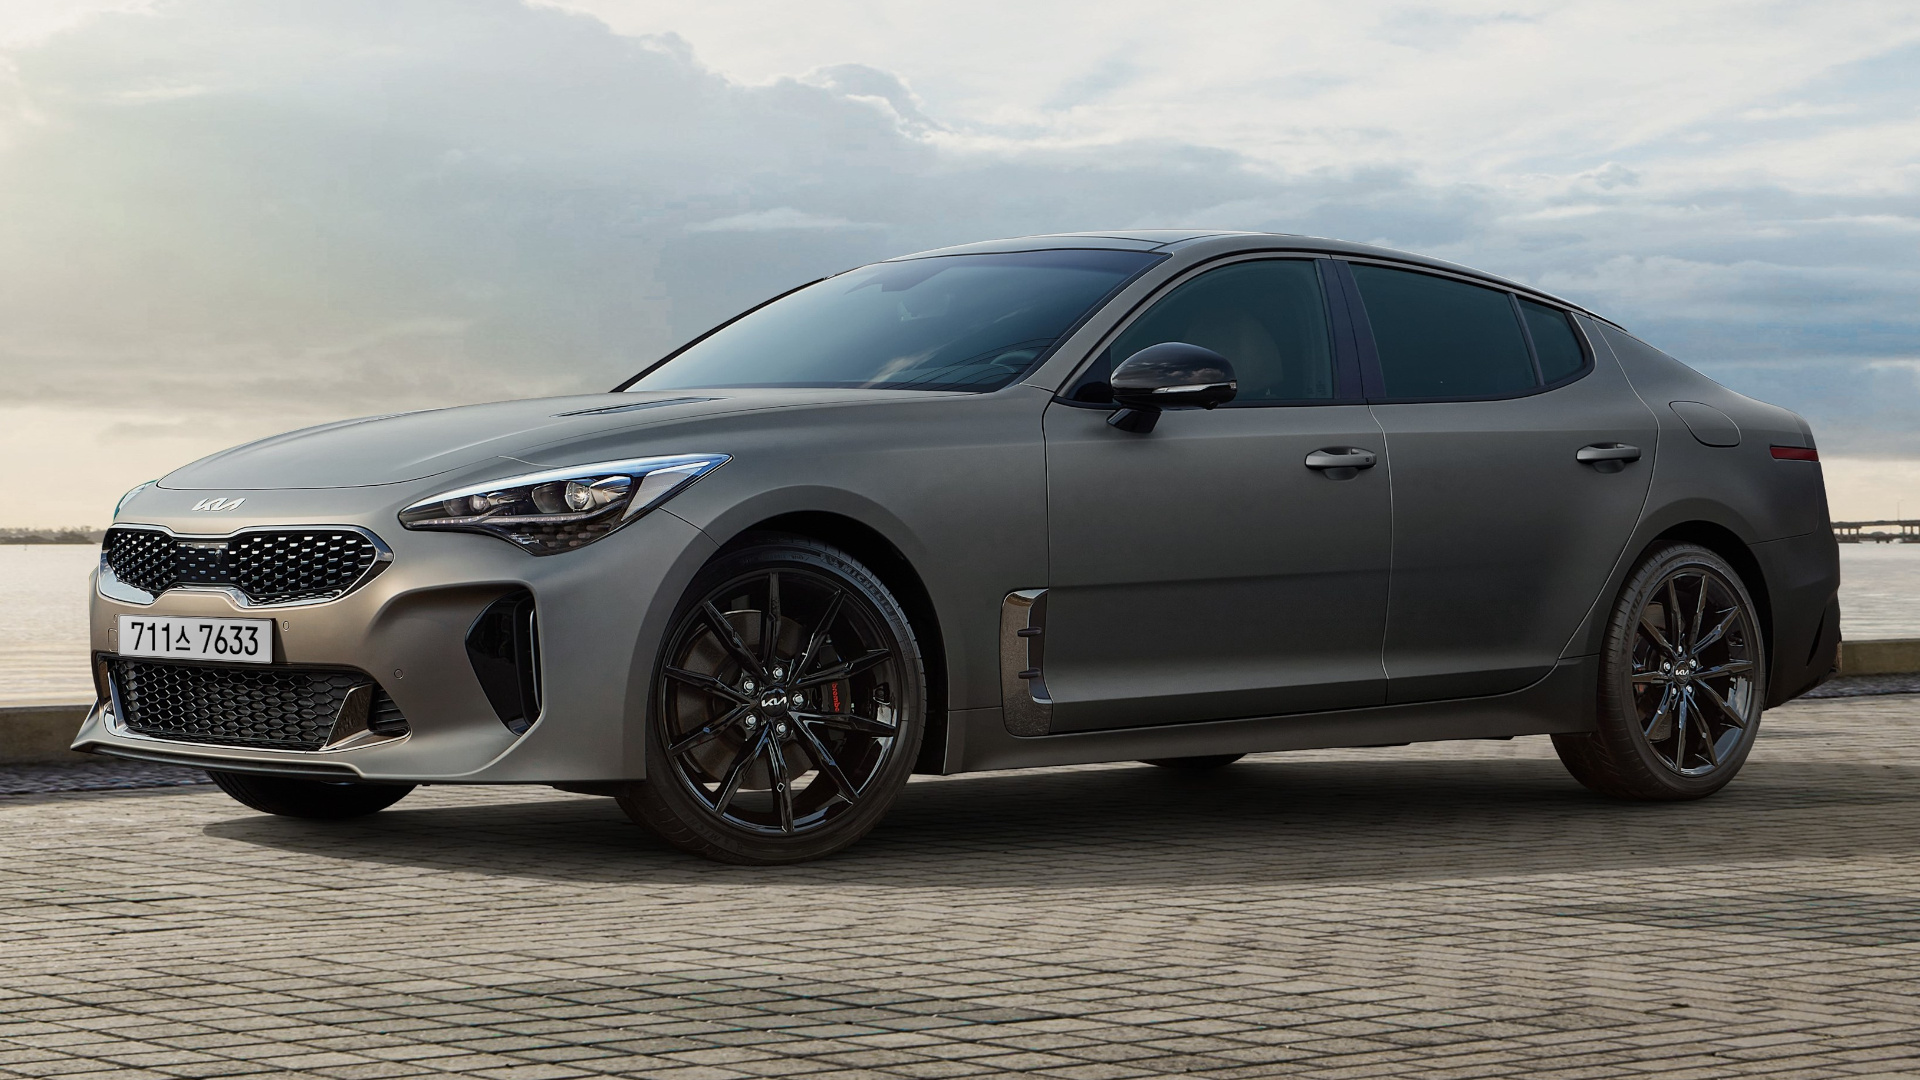 Kia Stinger Says Goodbye With Final Limited Edition Tribute Model